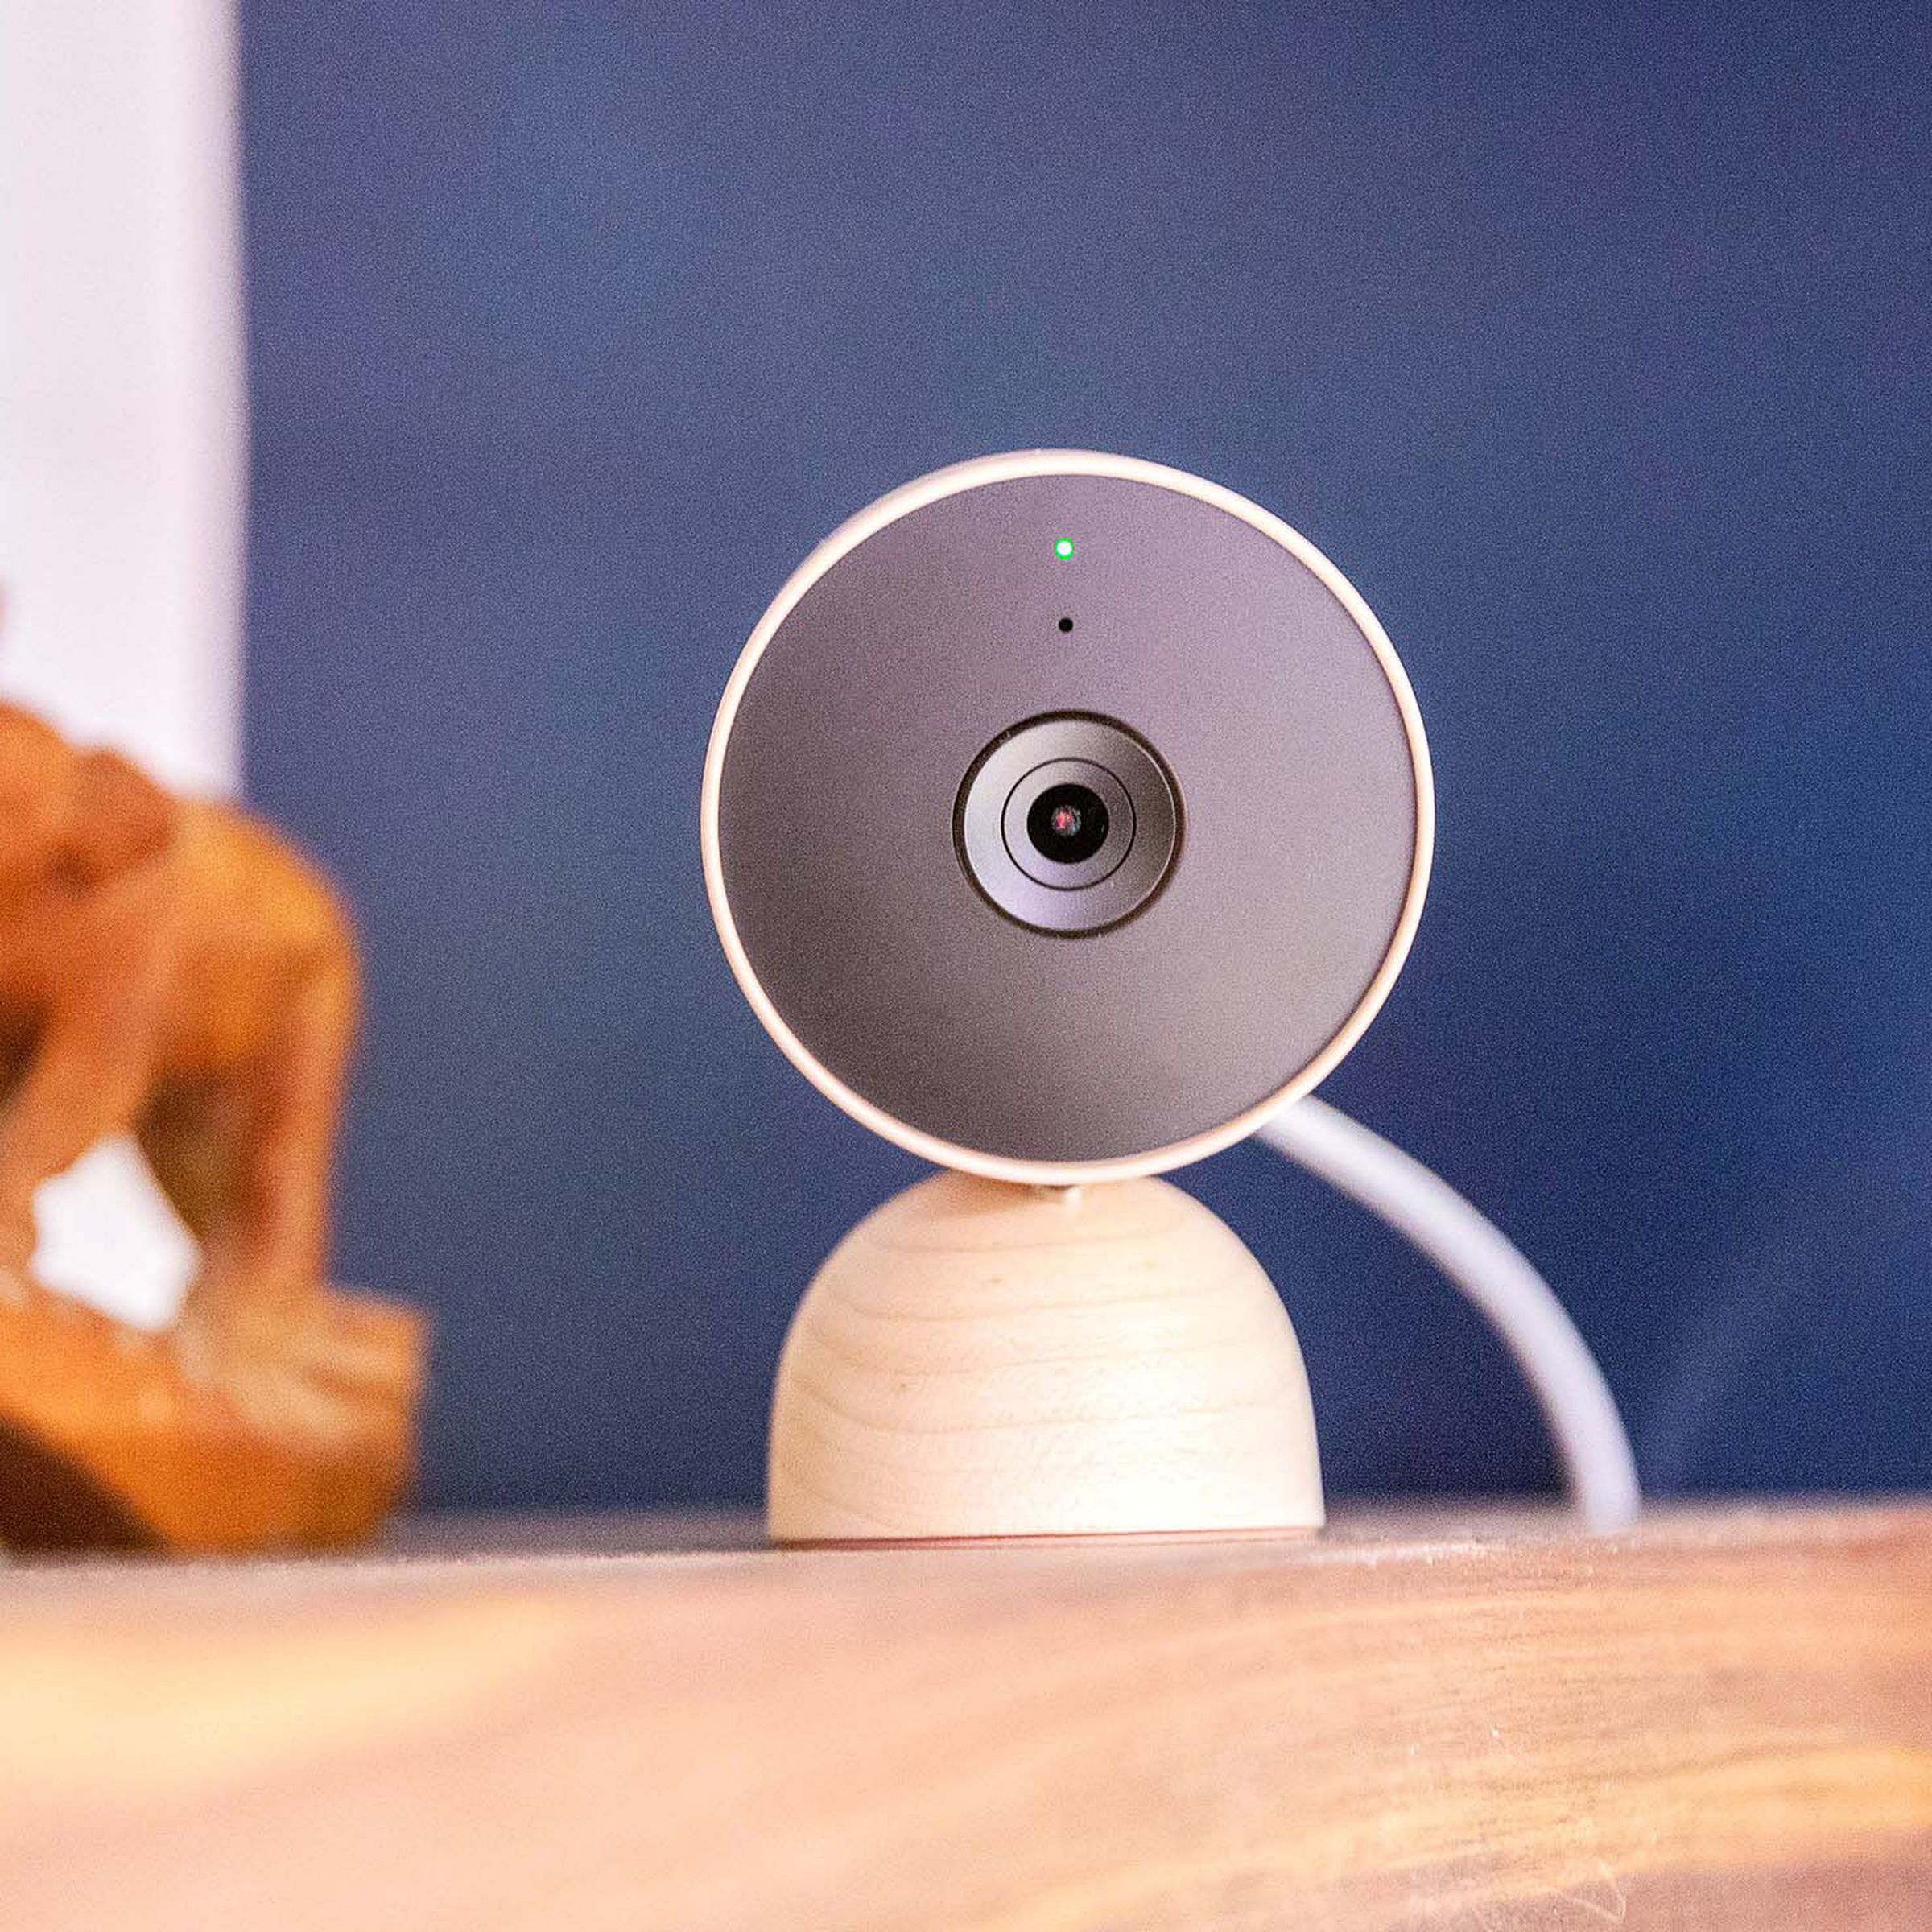 The new Google Nest Cam is a wired, indoor-only camera with free smart alerts for people, pets, and vehicles.